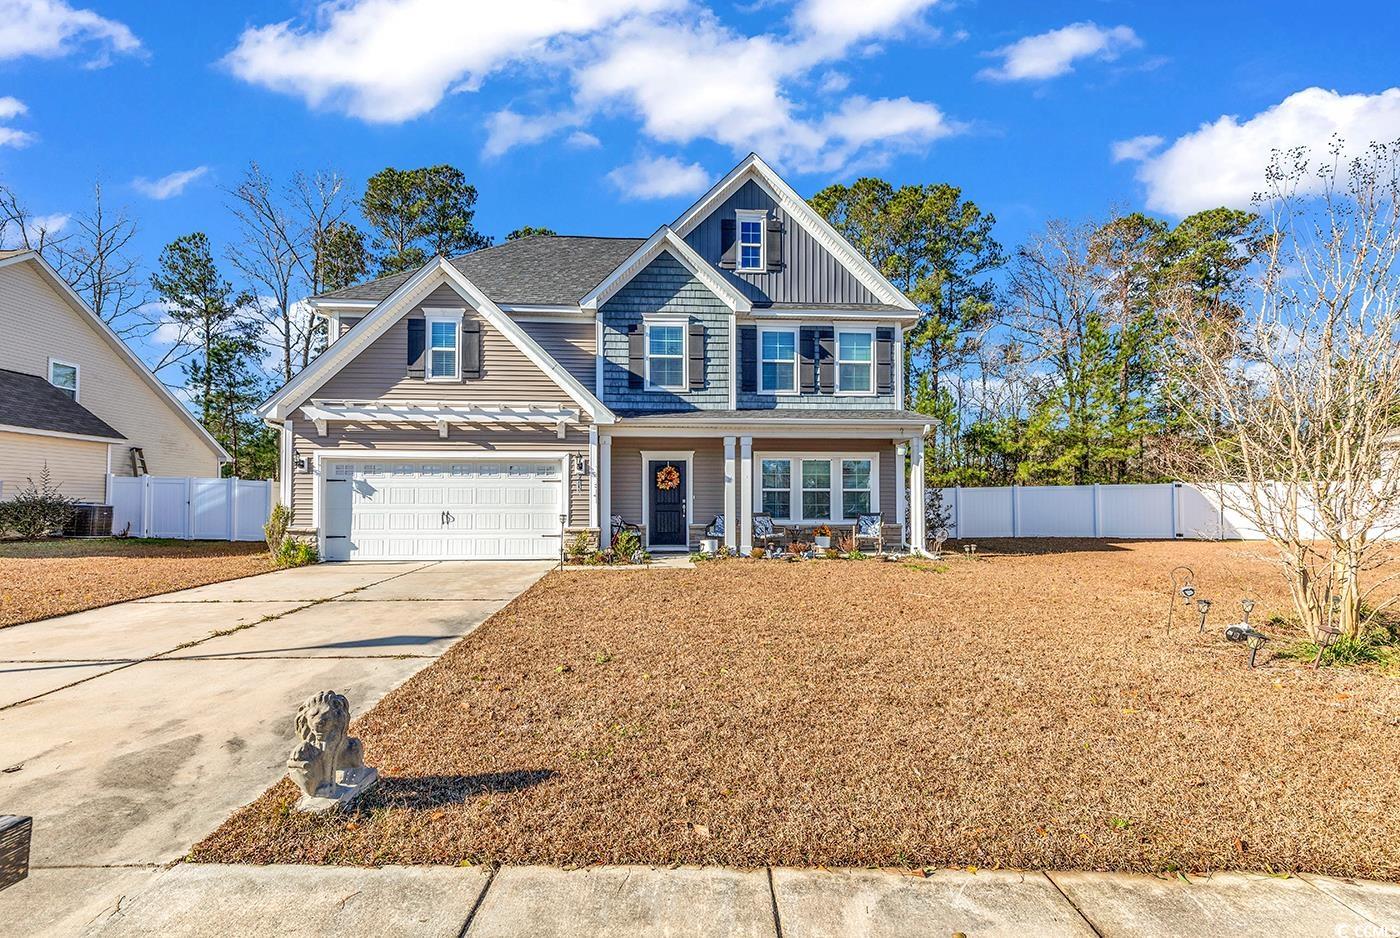 this is your opportunity to own this spacious 5 bedroom, 2.5 bathroom home.  this open floor plan includes a kitchen with granite countertops, a full bathroom plus a bonus room that can be a media center, children's play area or an additional family gathering area.   quietly tucked away, chandler's run is just minutes from all the attractions and beaches the grand strand has to offer!  enjoy the restaurants and river walk of conway and enjoy this town known for its halloween and christmas celebrations.